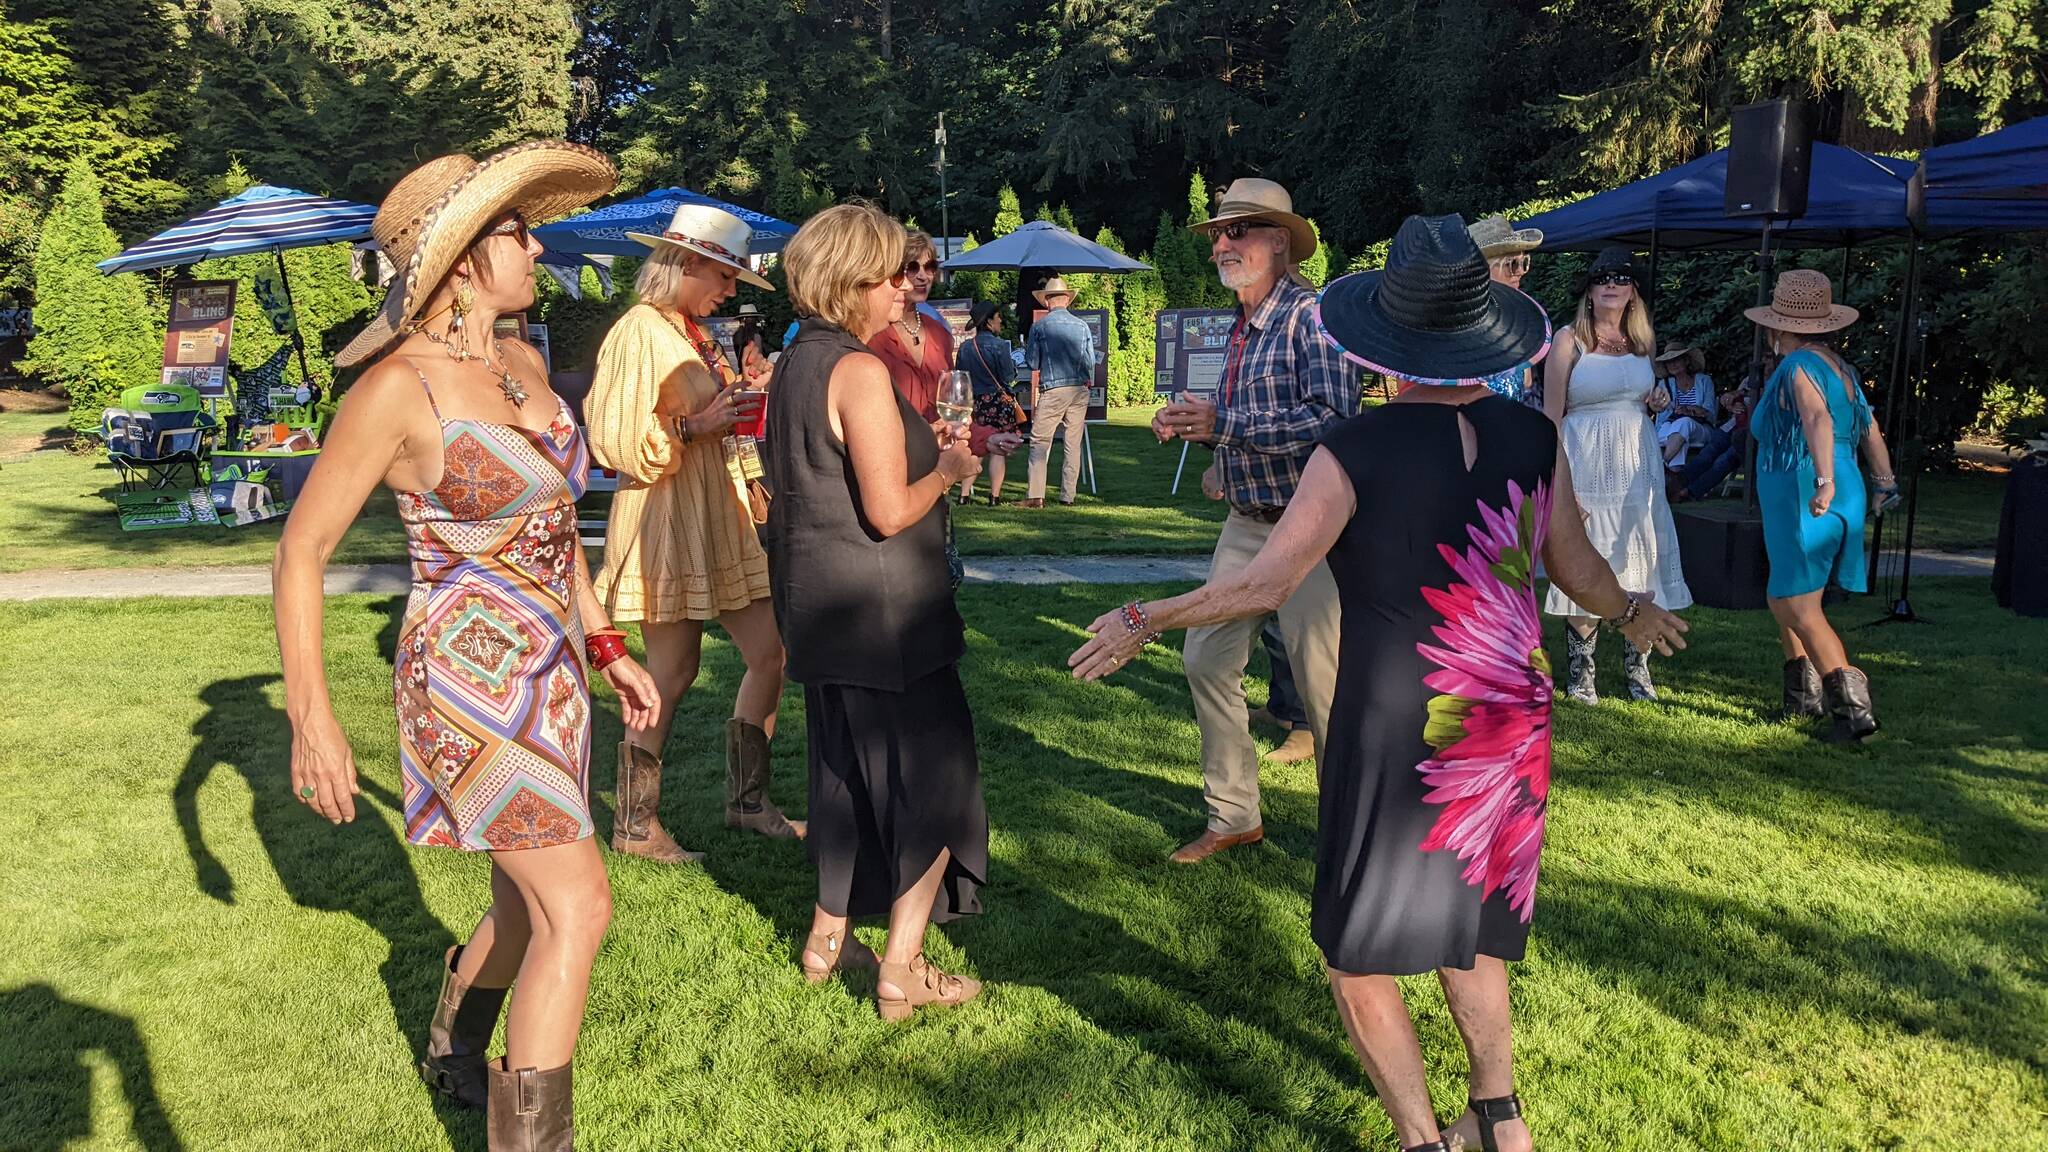 Guests dance to live music at FUSION Art Event August 3. Photo by Sarah Fox.